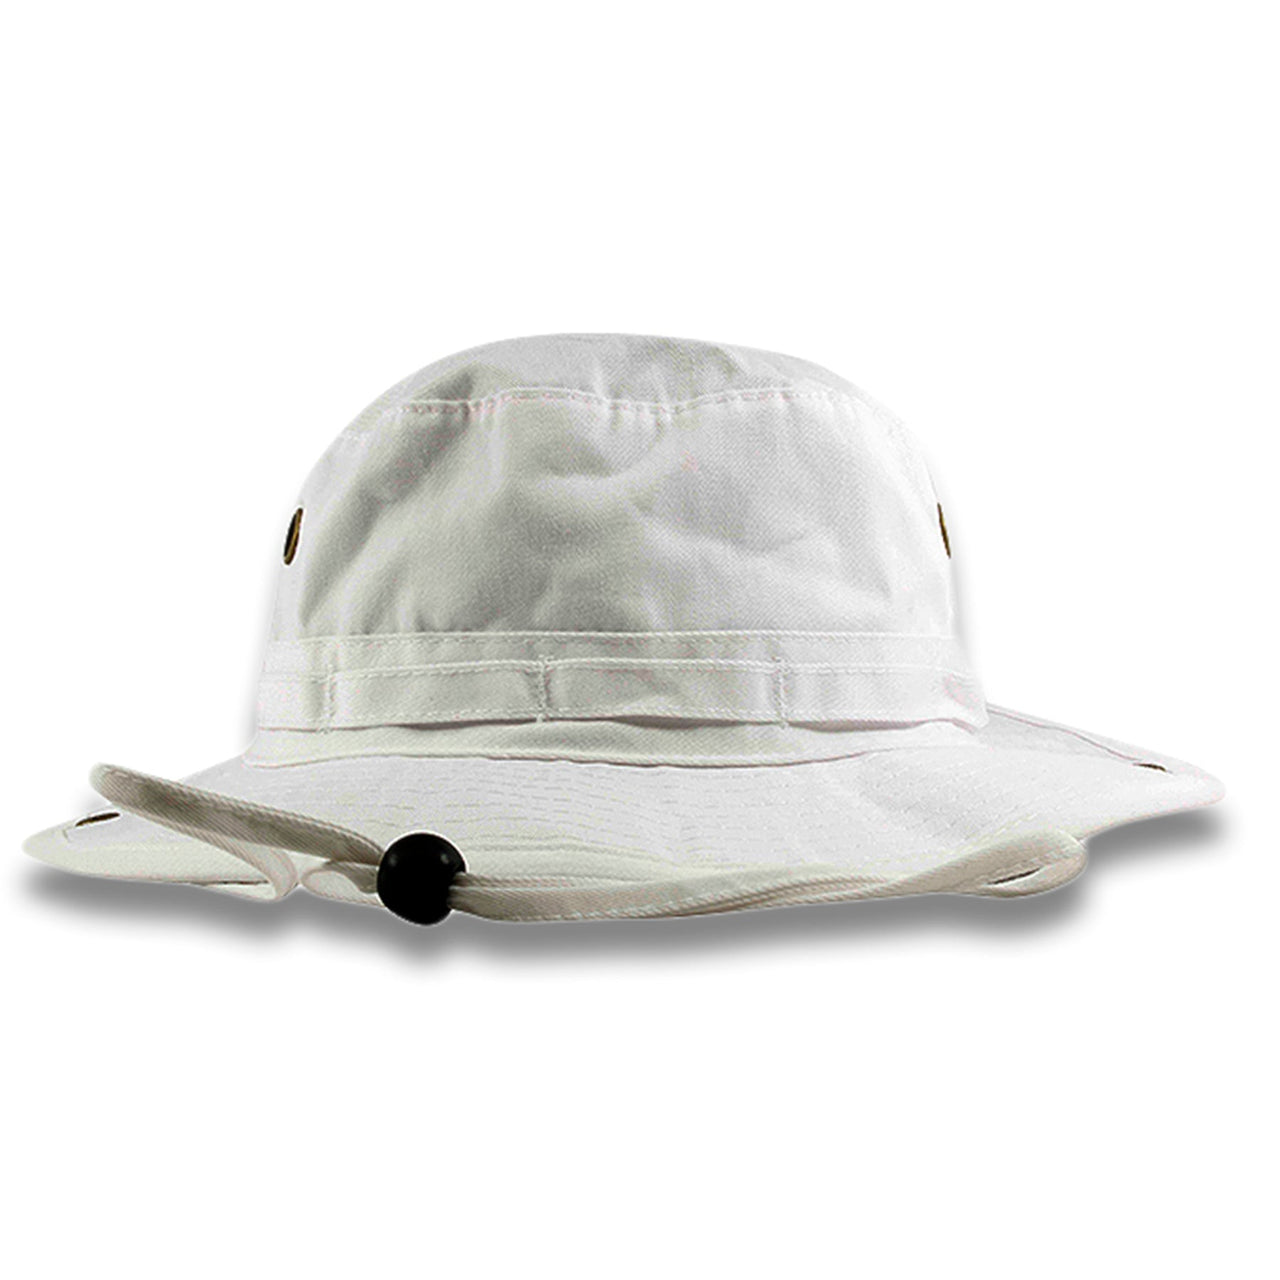 The white boonie bucket hat is solid white with a white adjustable draw string